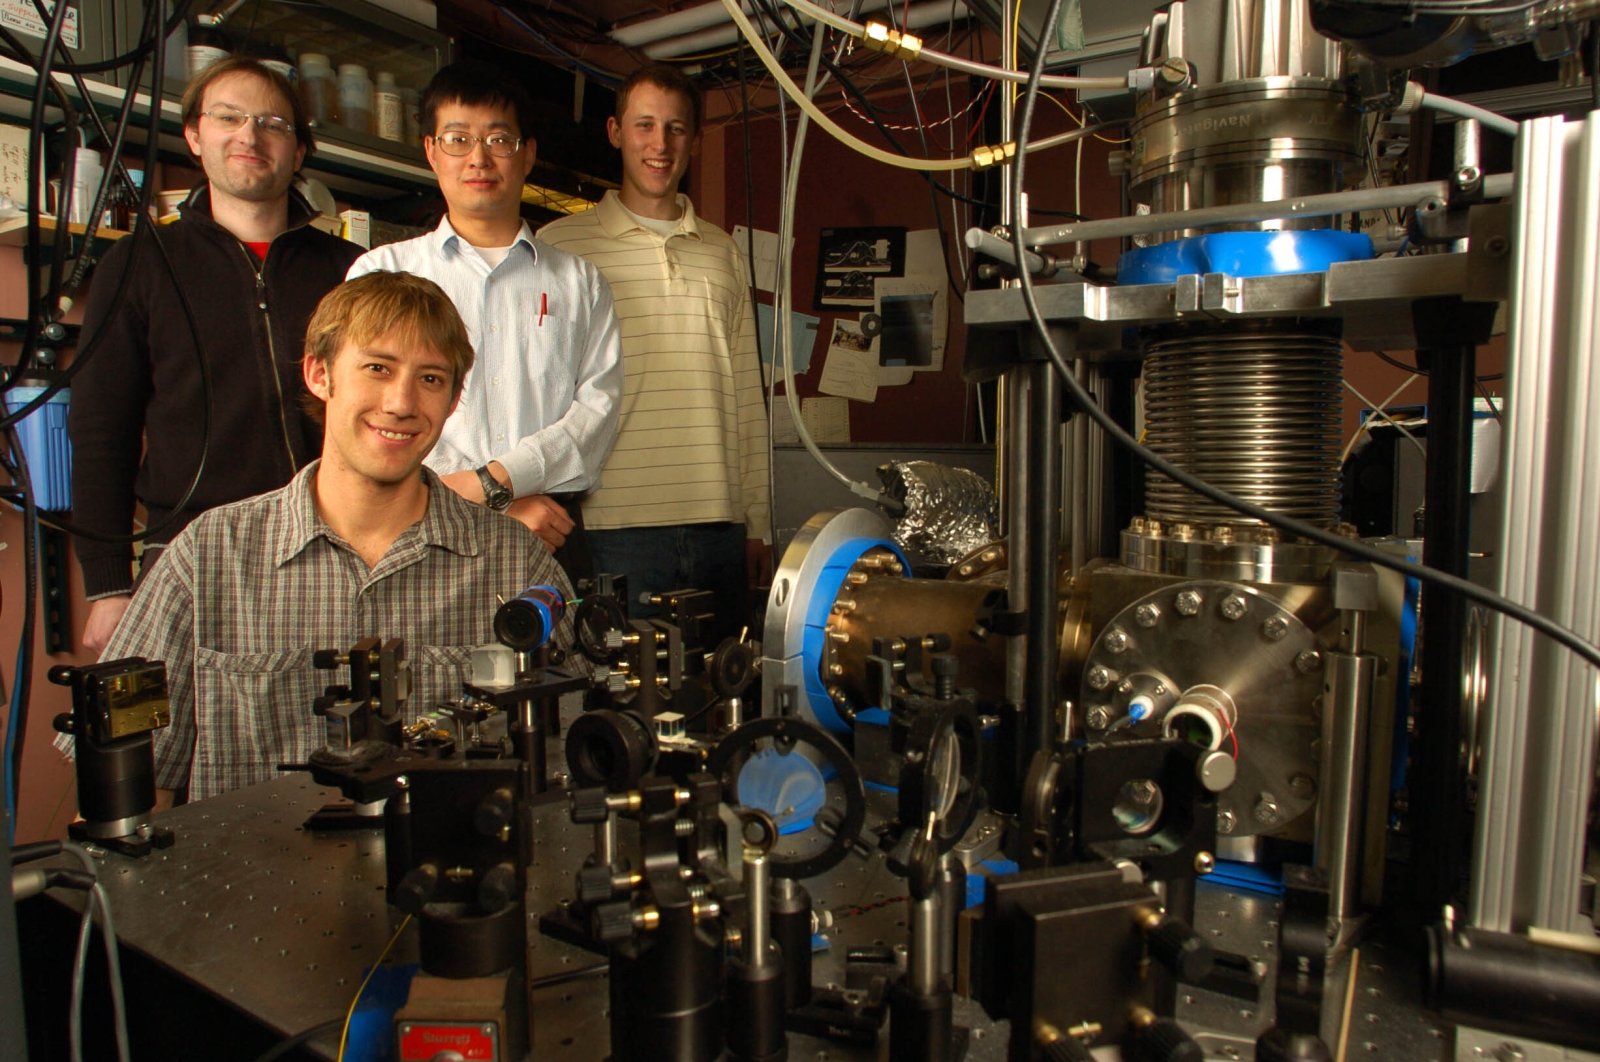 Florian Adler (L), Jun Ye (C), Matthew Kirchner (R) and seated Michael Thorpe pose in front of their optical frequency comb molecule detection system at the University of Colorado, in Boulder, Colorado, U.S. (Getty Images)